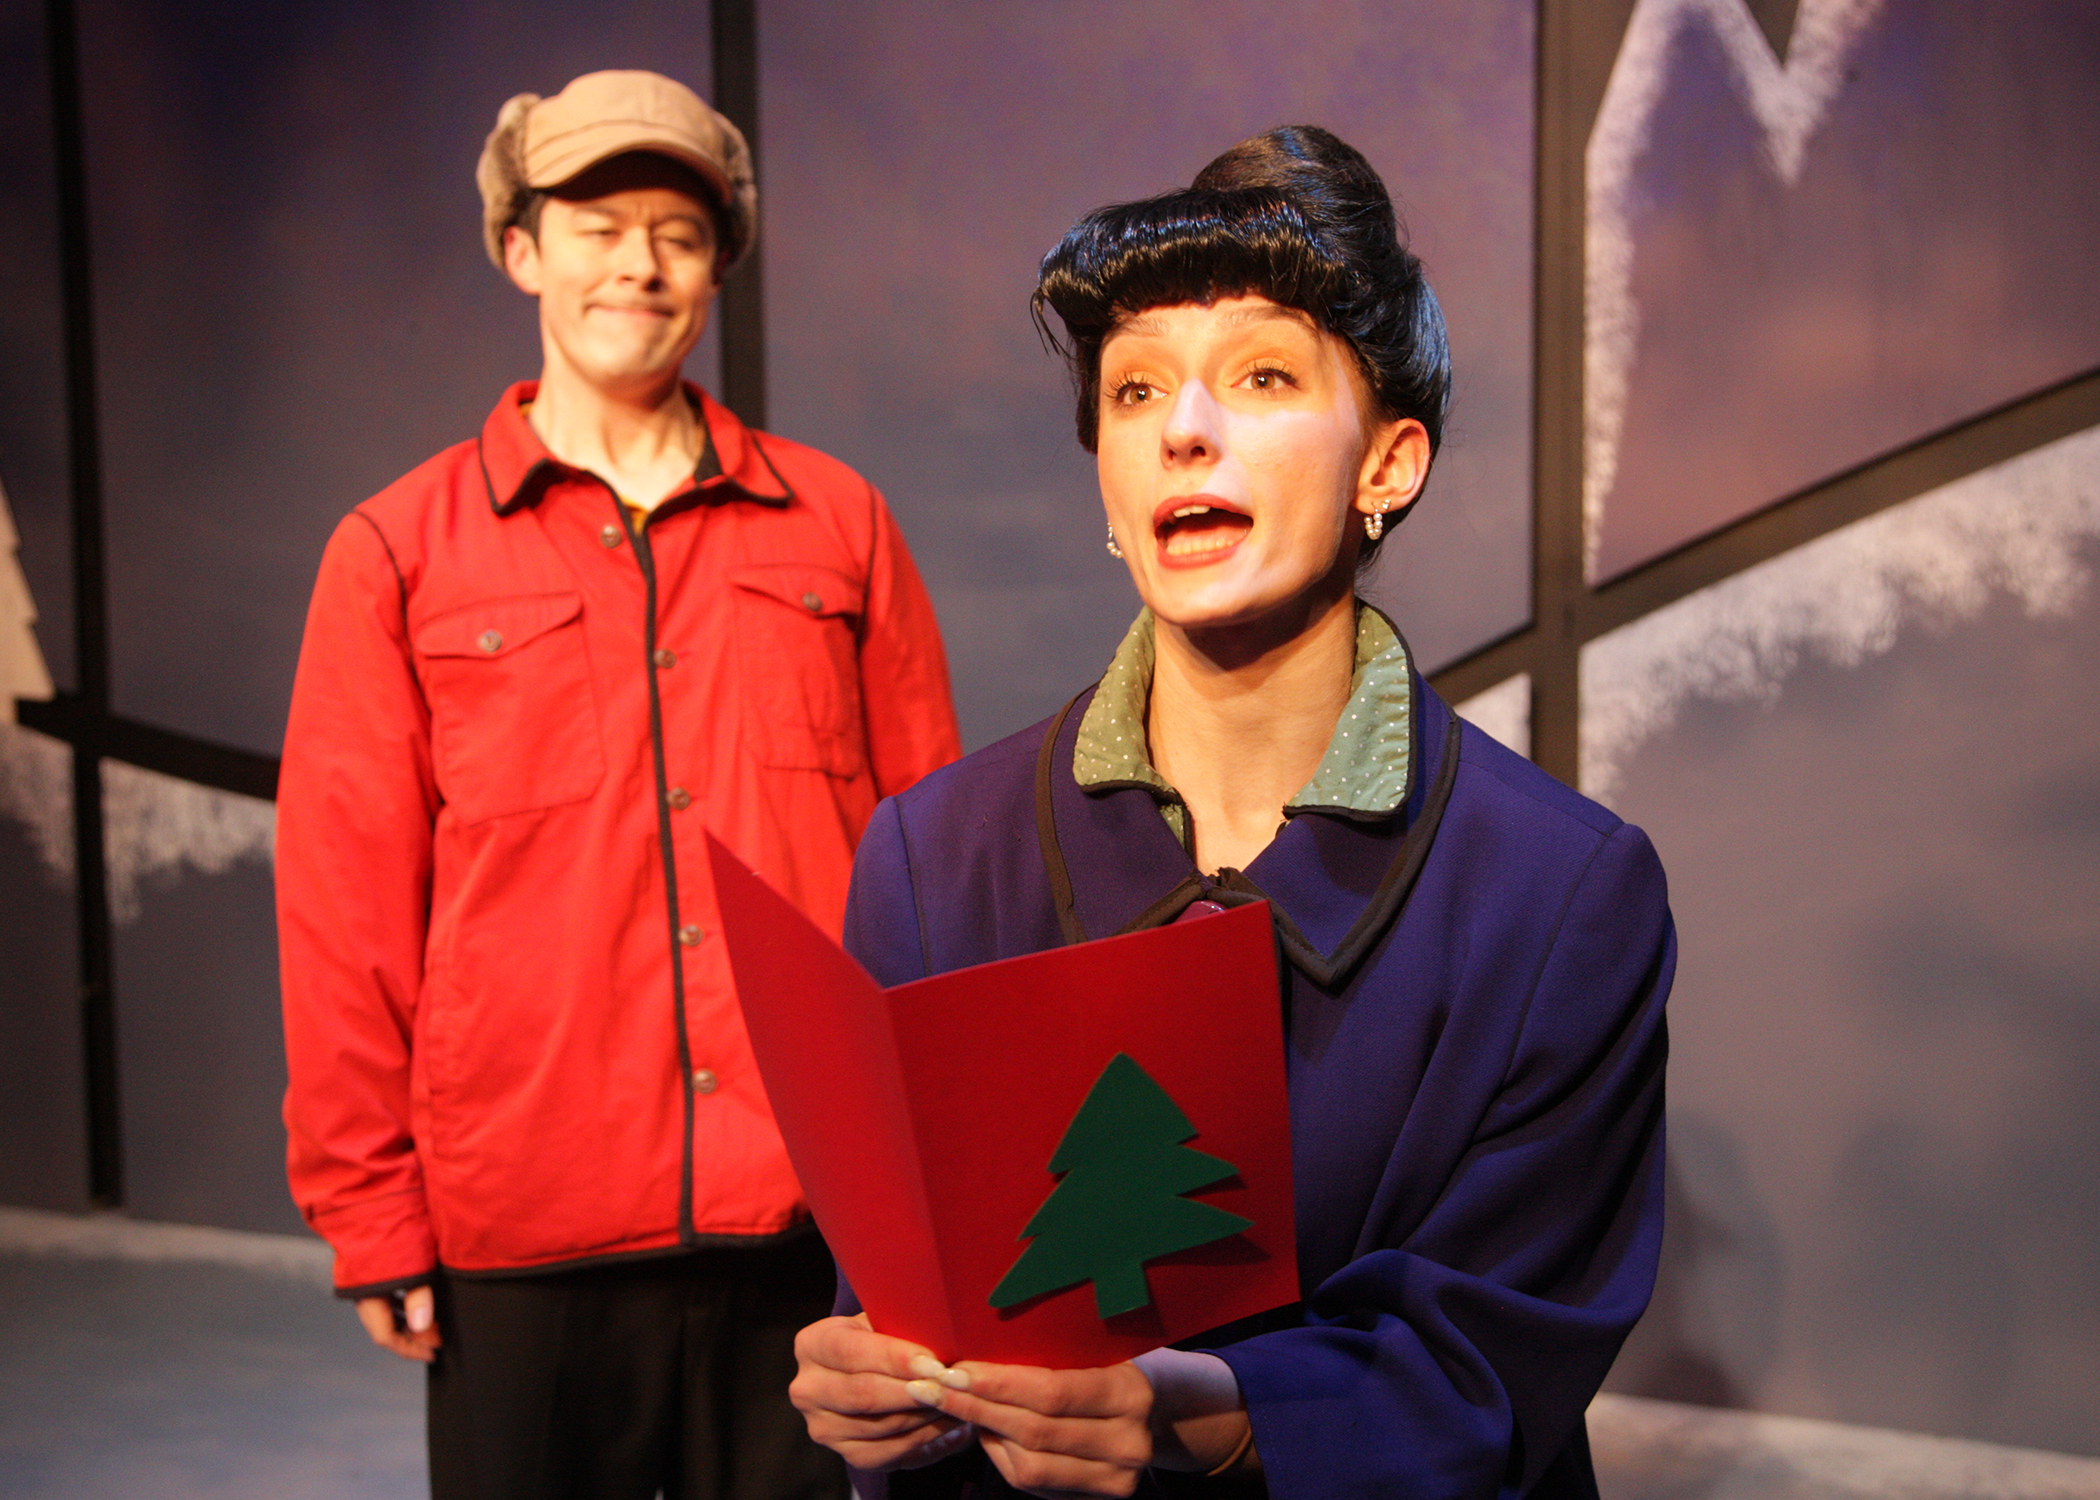 Matt Takahashi and Alyssa Corella in the encore presentation of “A Charlie Brown Christmas.” This live version of Charles Schulz’s classic television special adapted by Eric Schaeffer and directed by James Michael McHale will run thru December 19, 2021 on the Fyda-Mar Stage at the Bette Aitken theater arts Center.